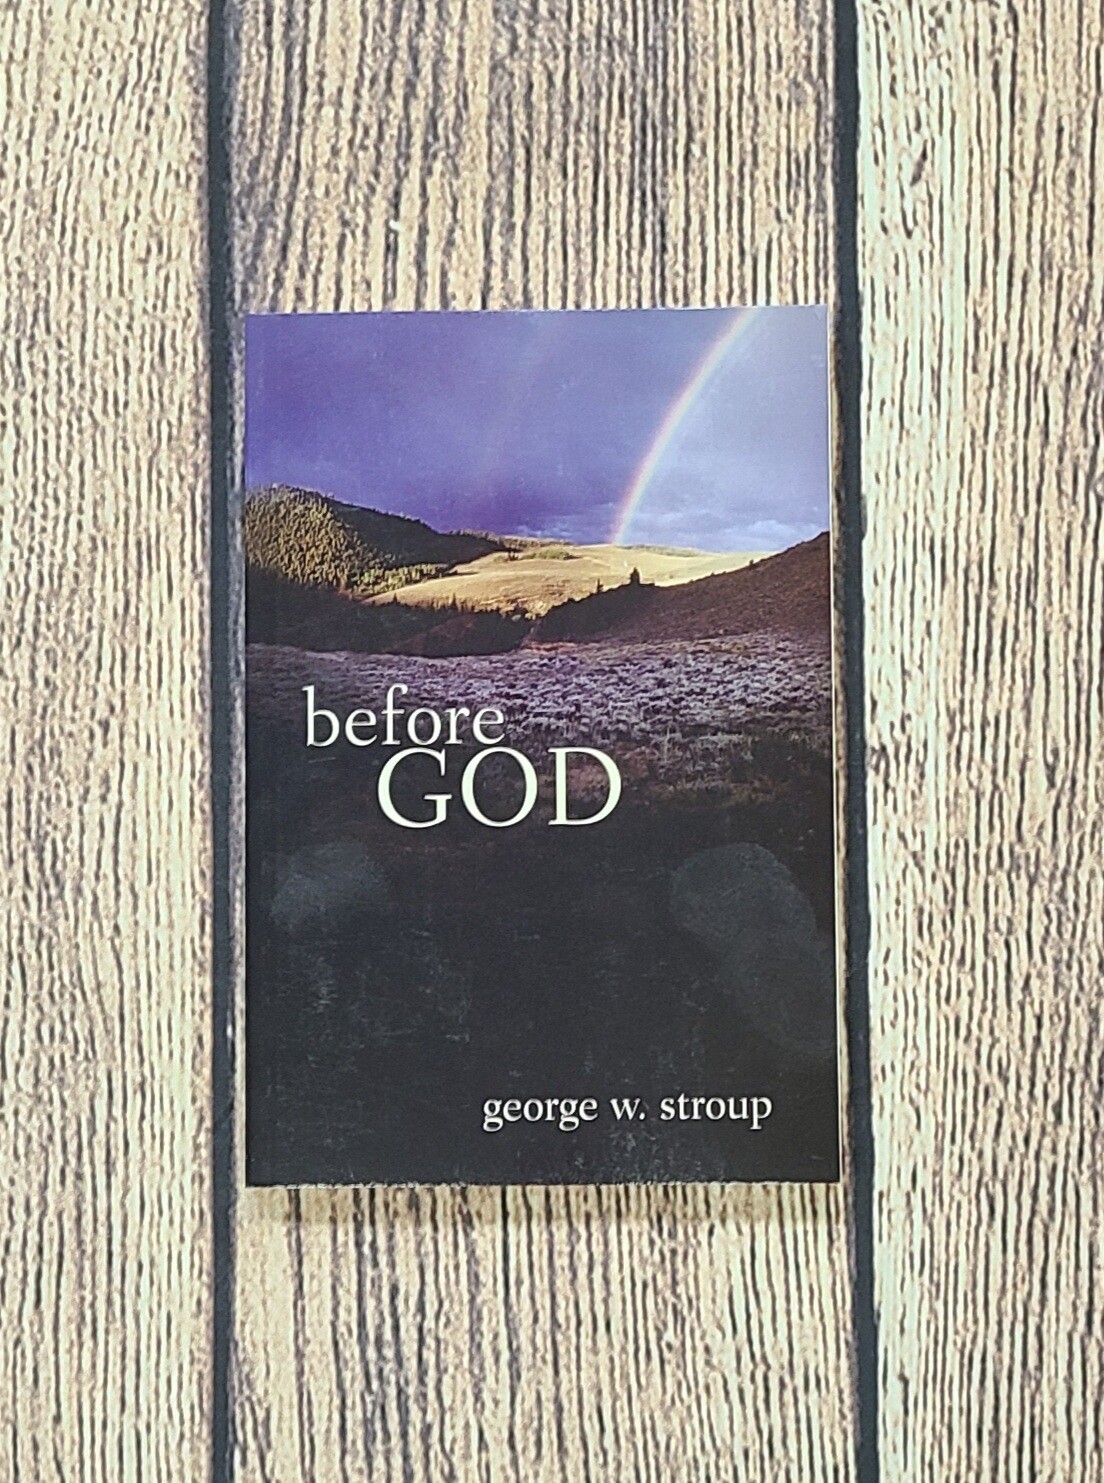 Before God by George W. Stroup